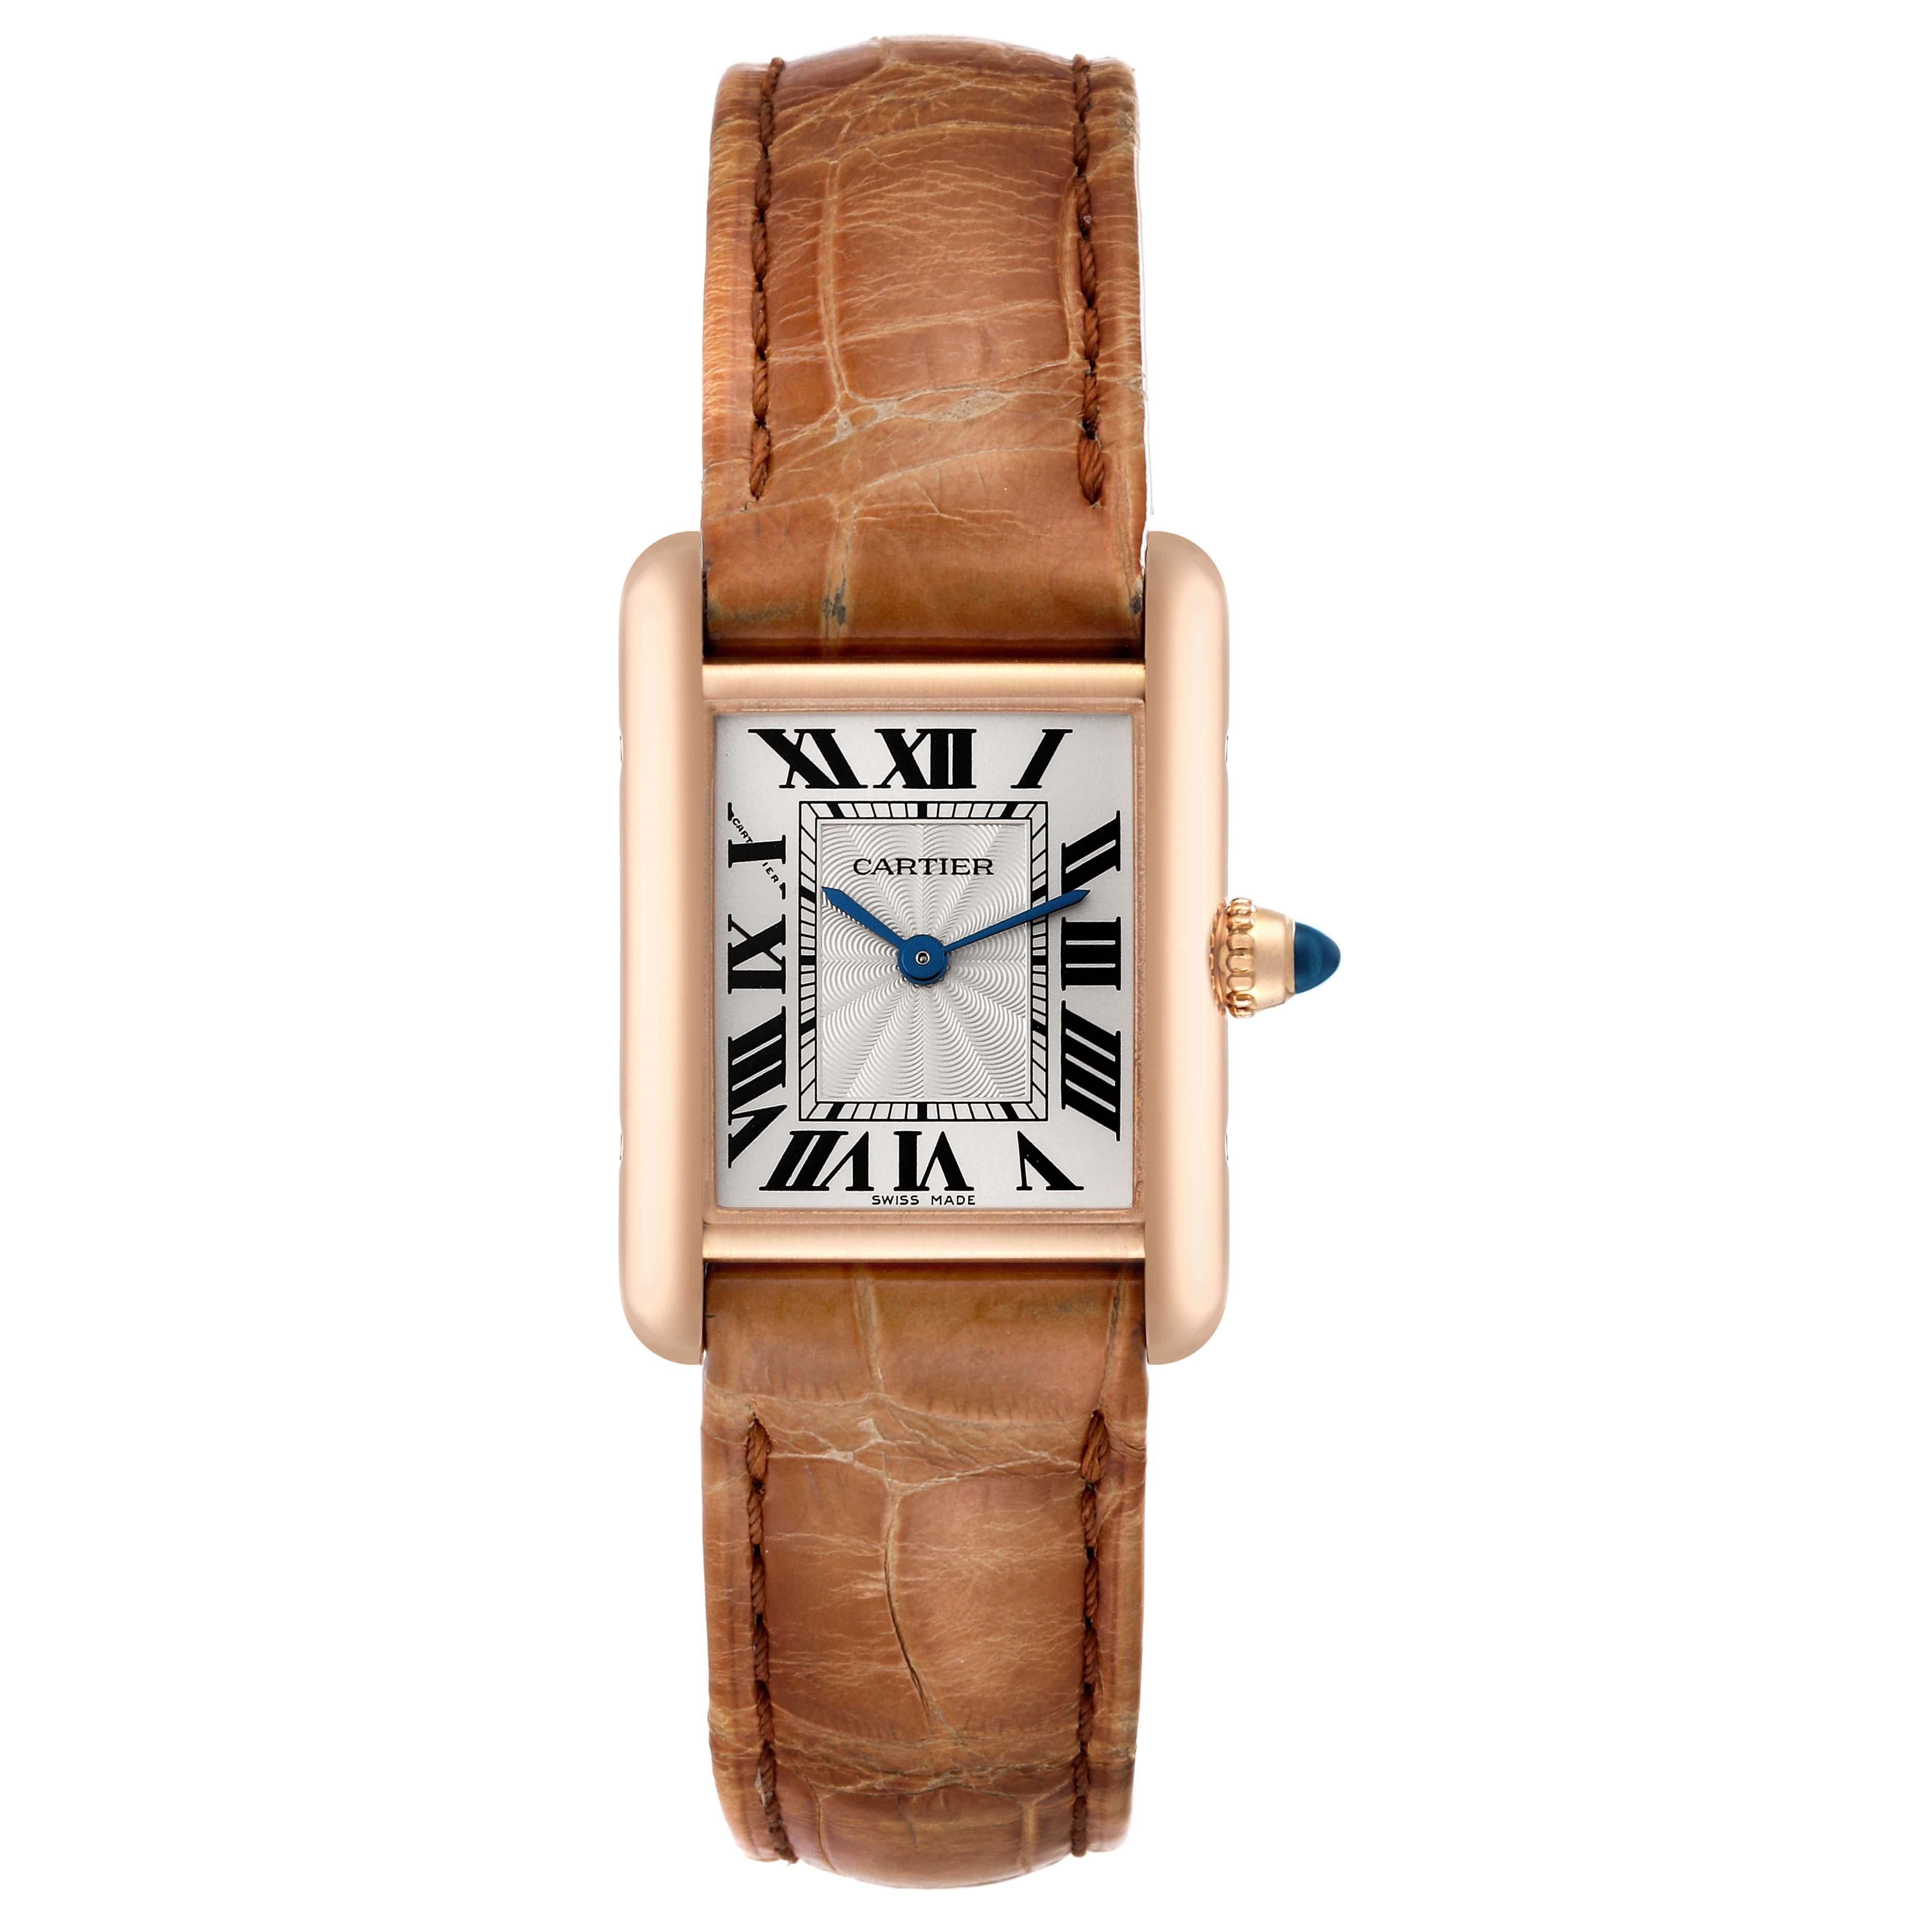 Cartier Tank Louis Rose Gold Mechanical Ladies Watch WGTA0010 Papers. Manual winding movement. 18k rose gold case 29.5 x 22.0 mm. Circular grained crown set with a blue sapphire cabochon. . Mineral crystal. Silvered guilloche dial with black Roman